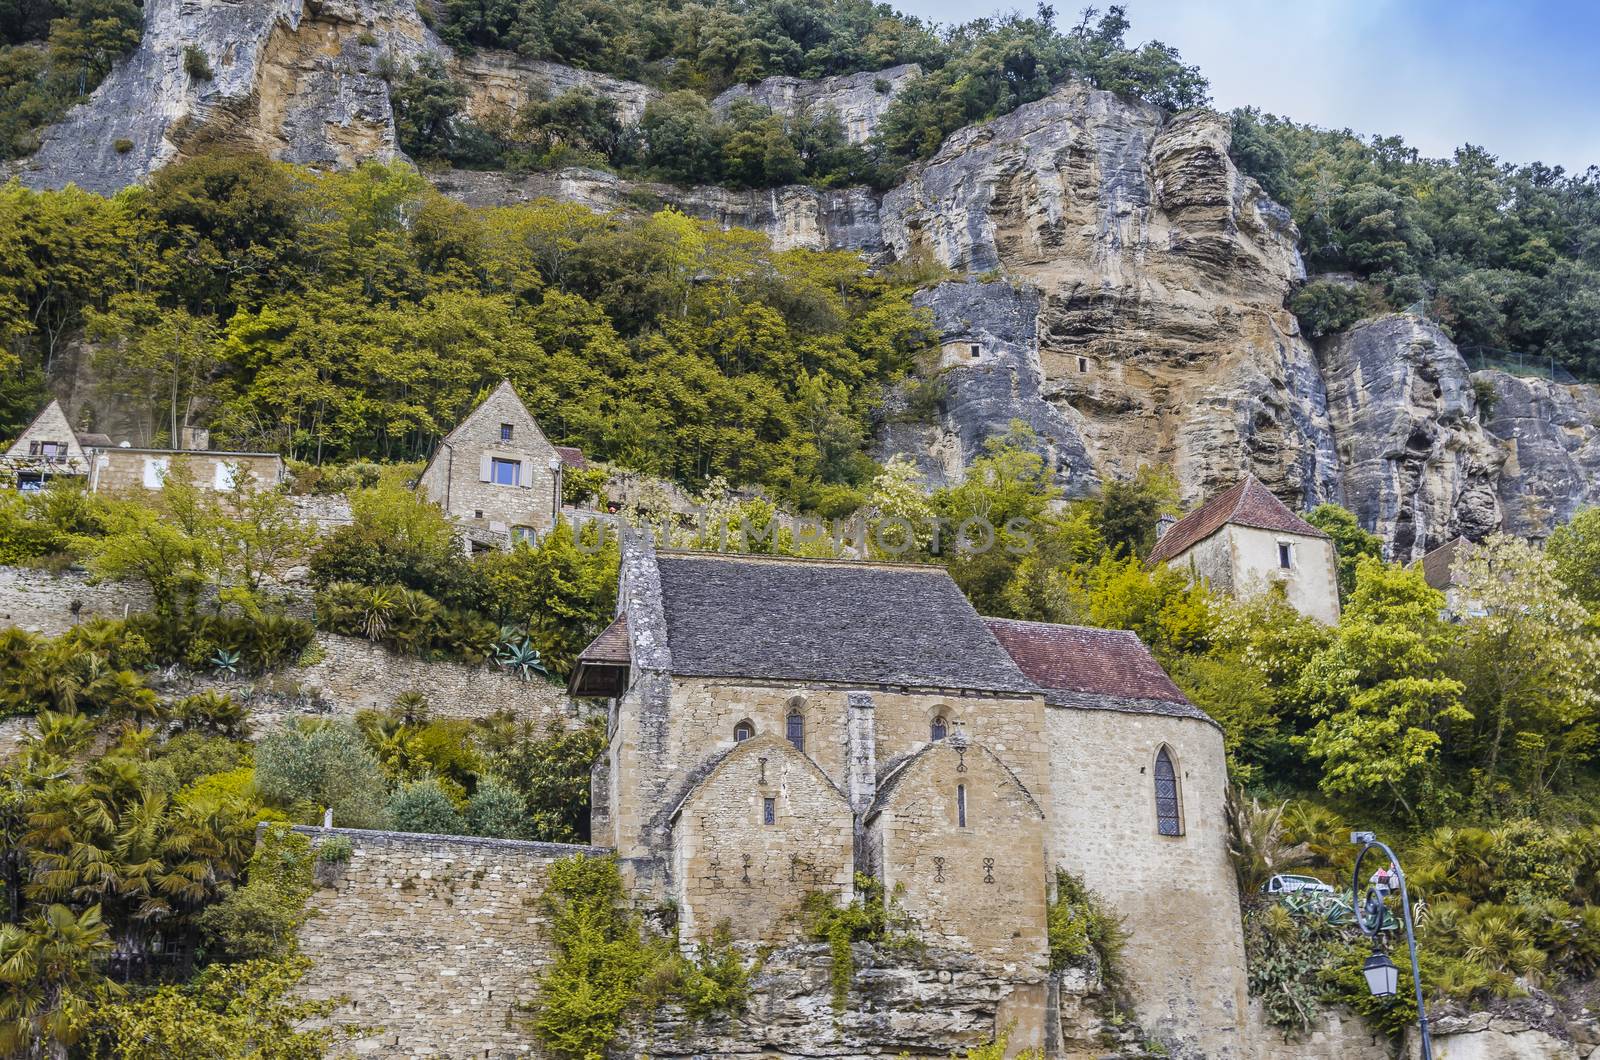 In the French region of Aquitaine in the department of Dordogne is the village of la roque gageac, located at the foot of a cliff and perched on it.